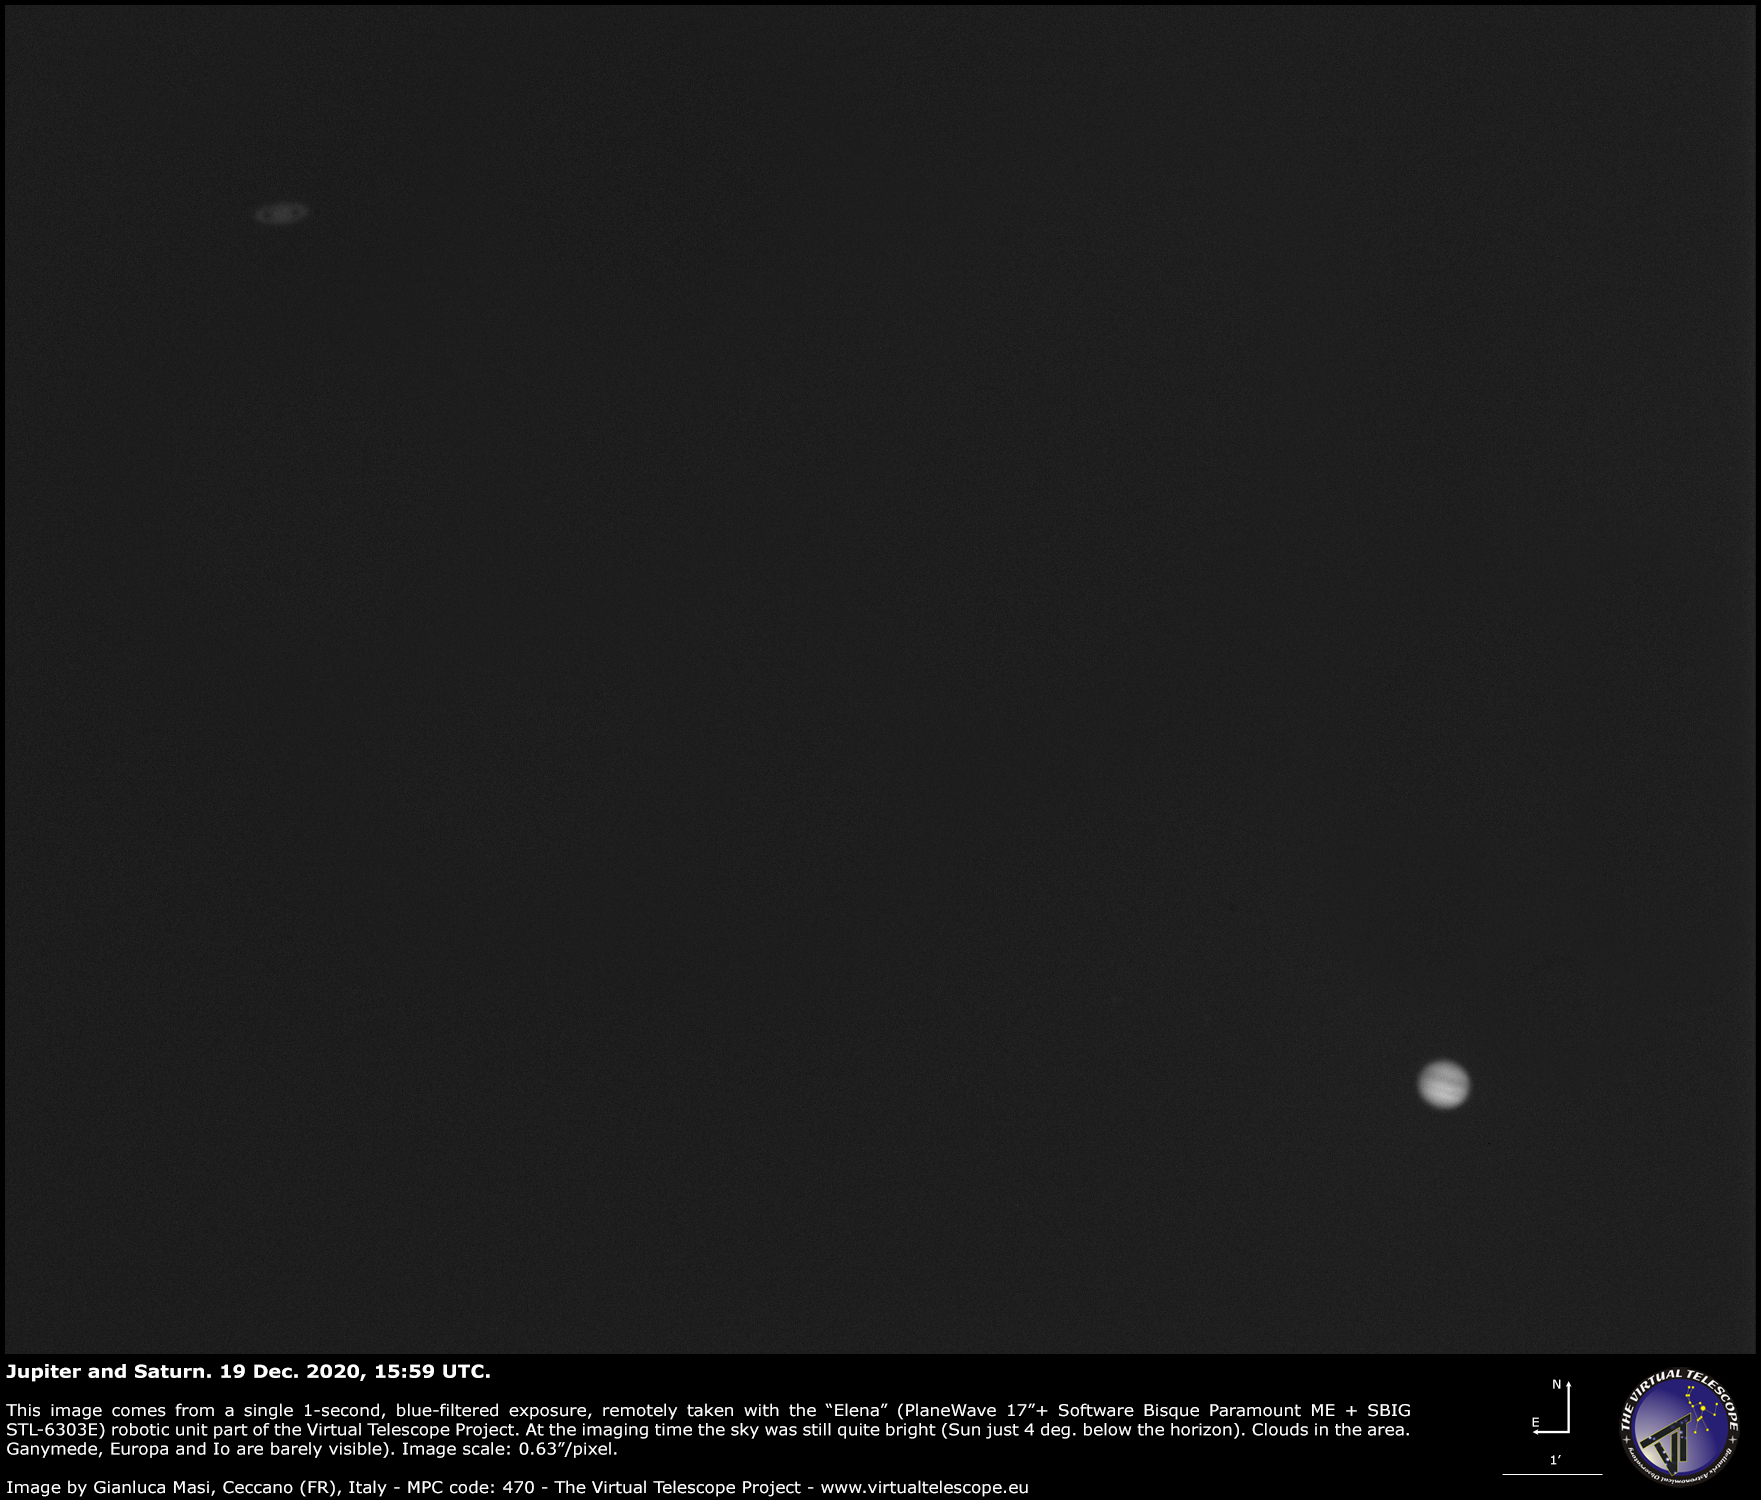 Jupiter and Saturn, about 1/4th of a degree apart. 19 Dec. 2020.